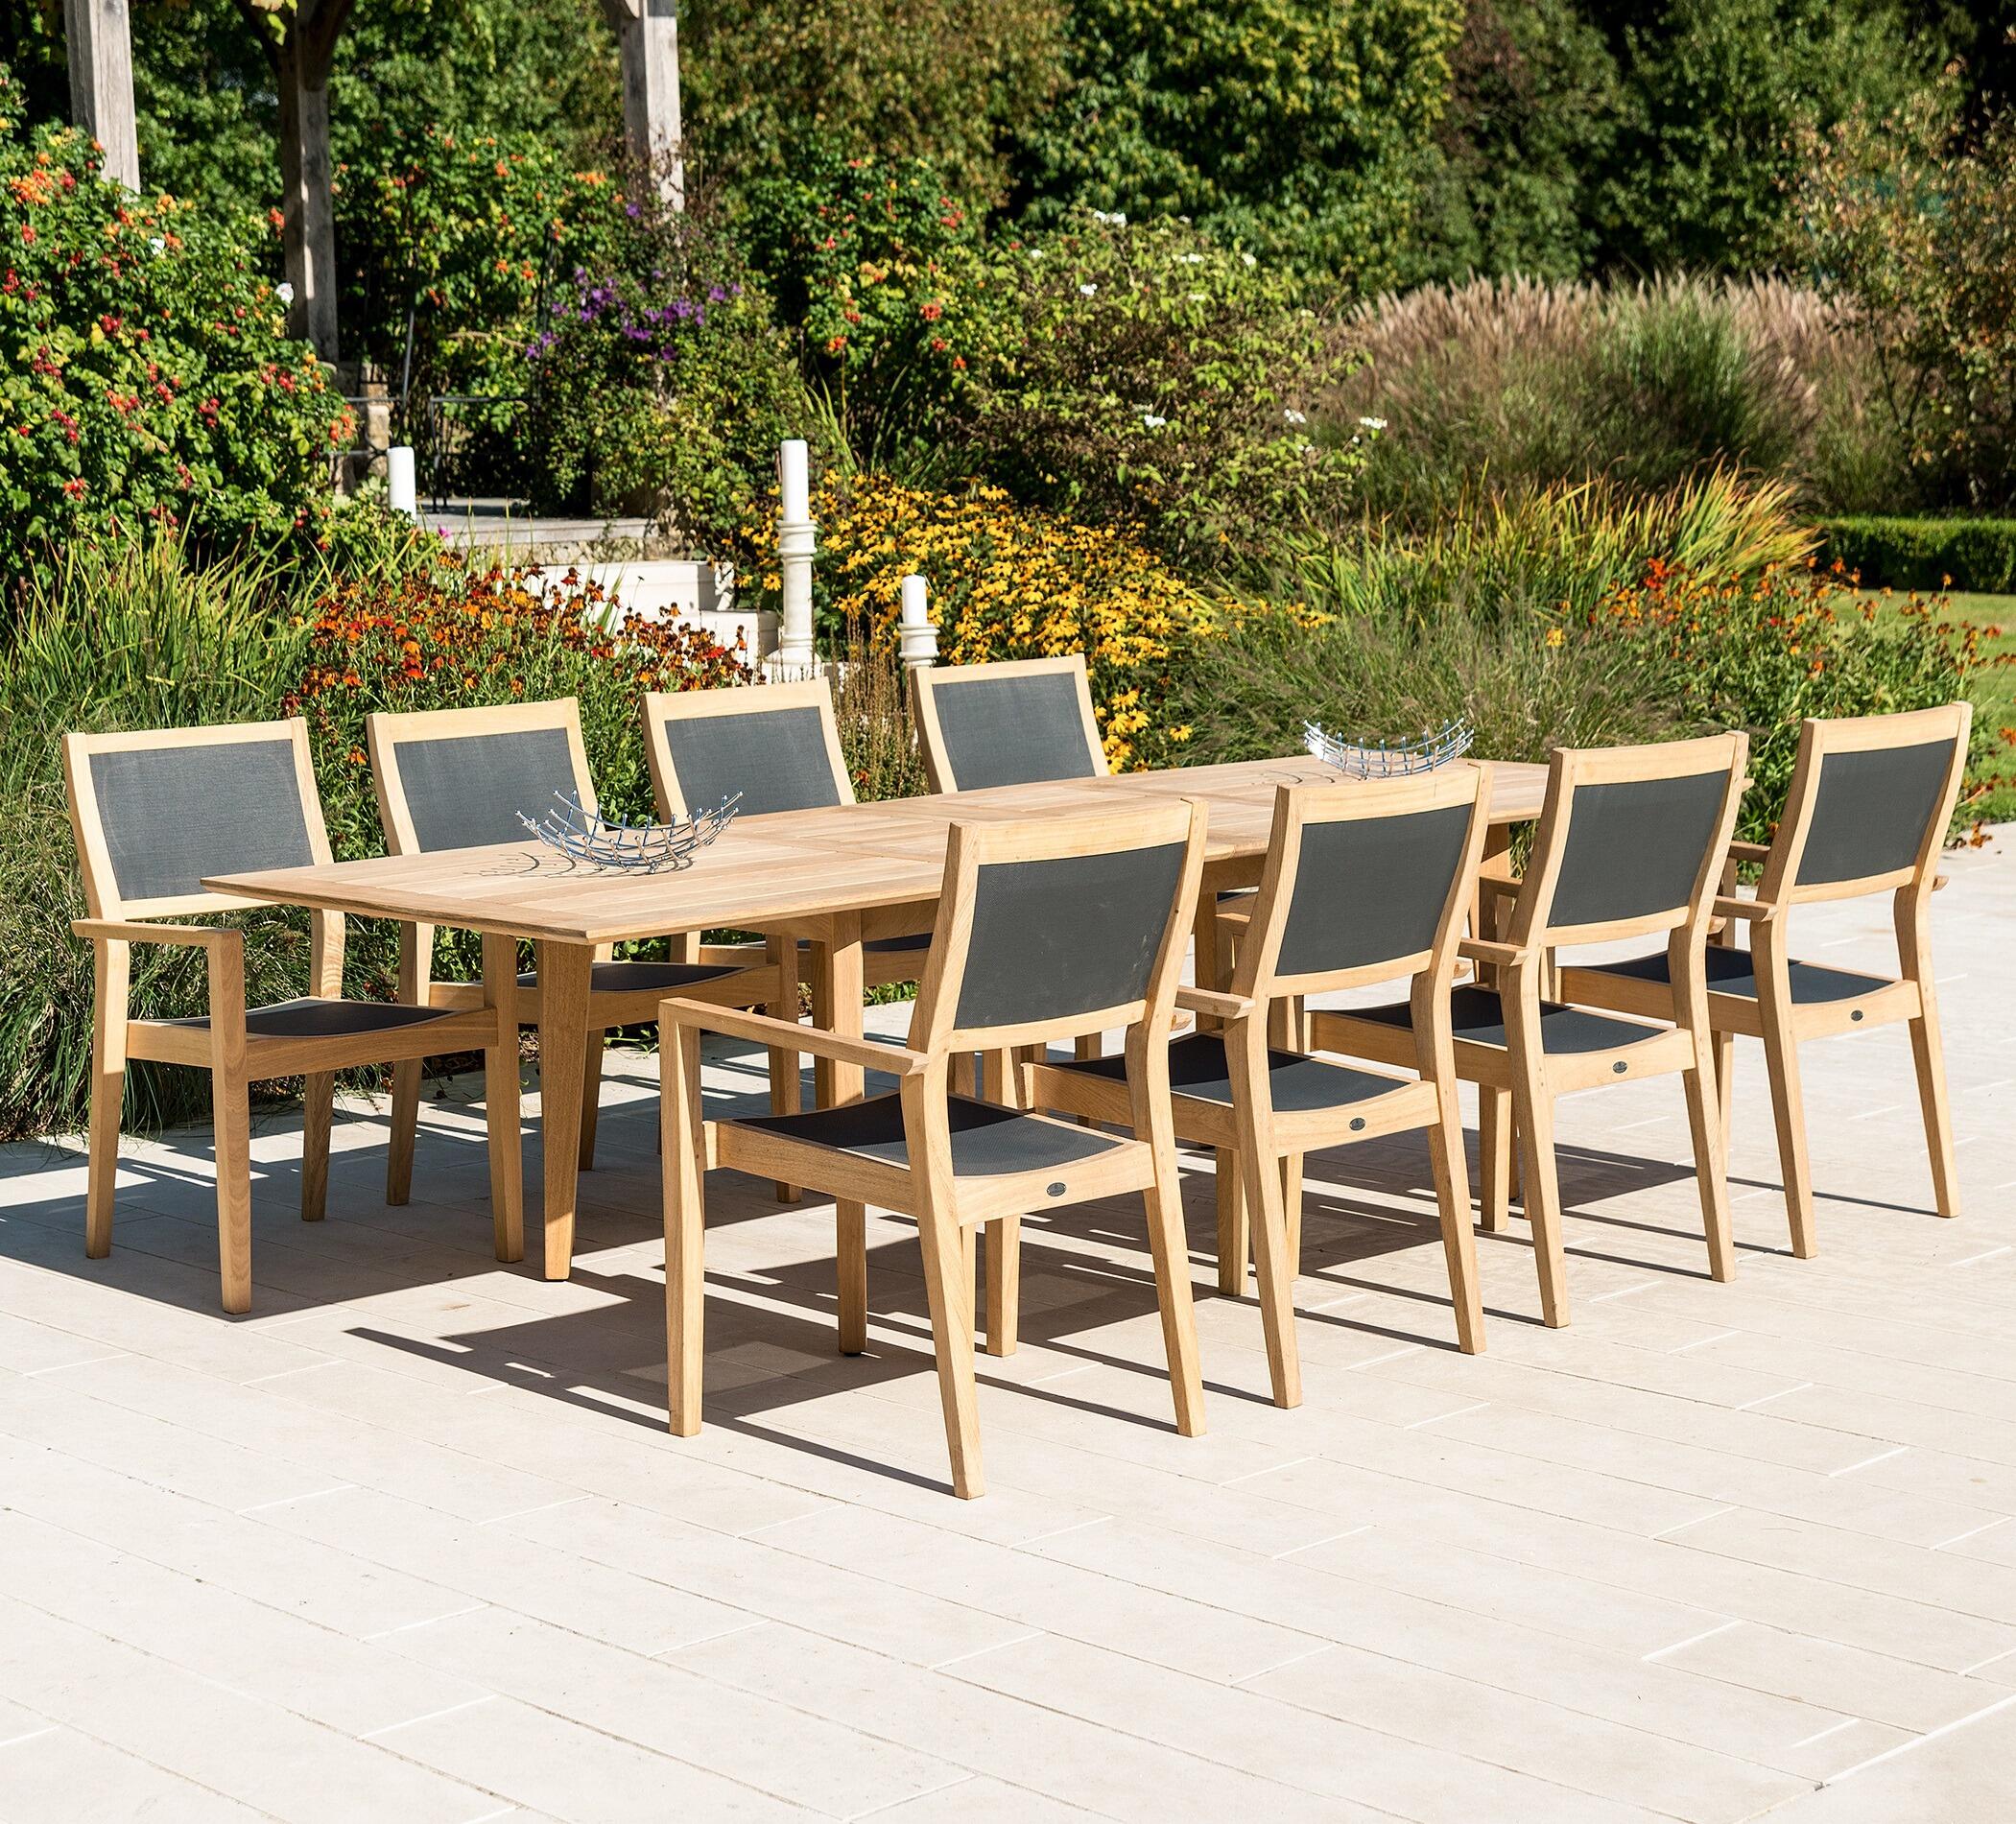 modern extending garden dining table 10 seater with roble hardwood and black rose dining chairs armchairs